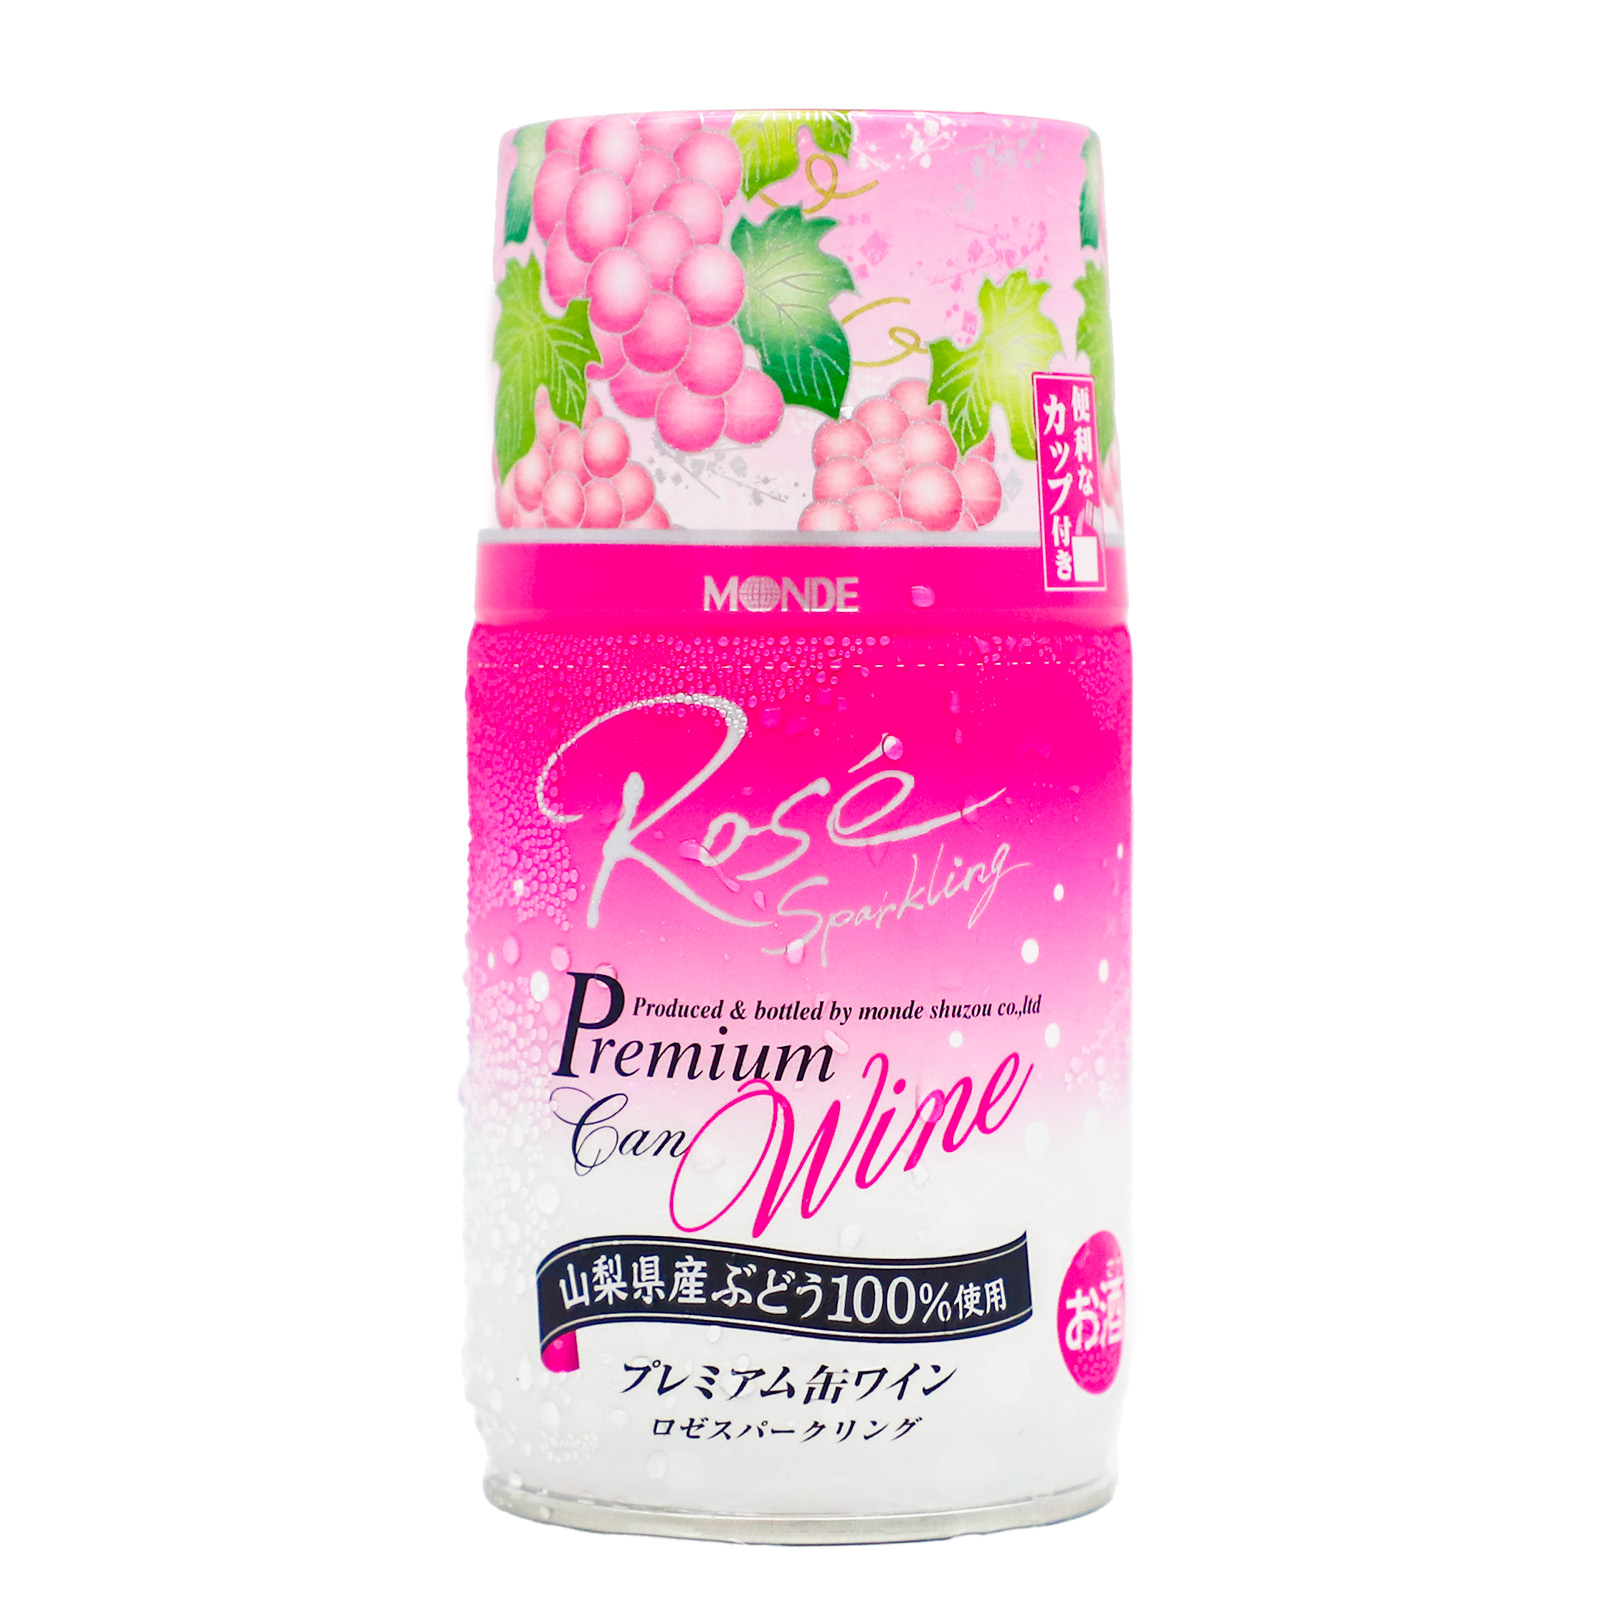 Premium Canned wine rose sparkling with cup [Bundle of 2]